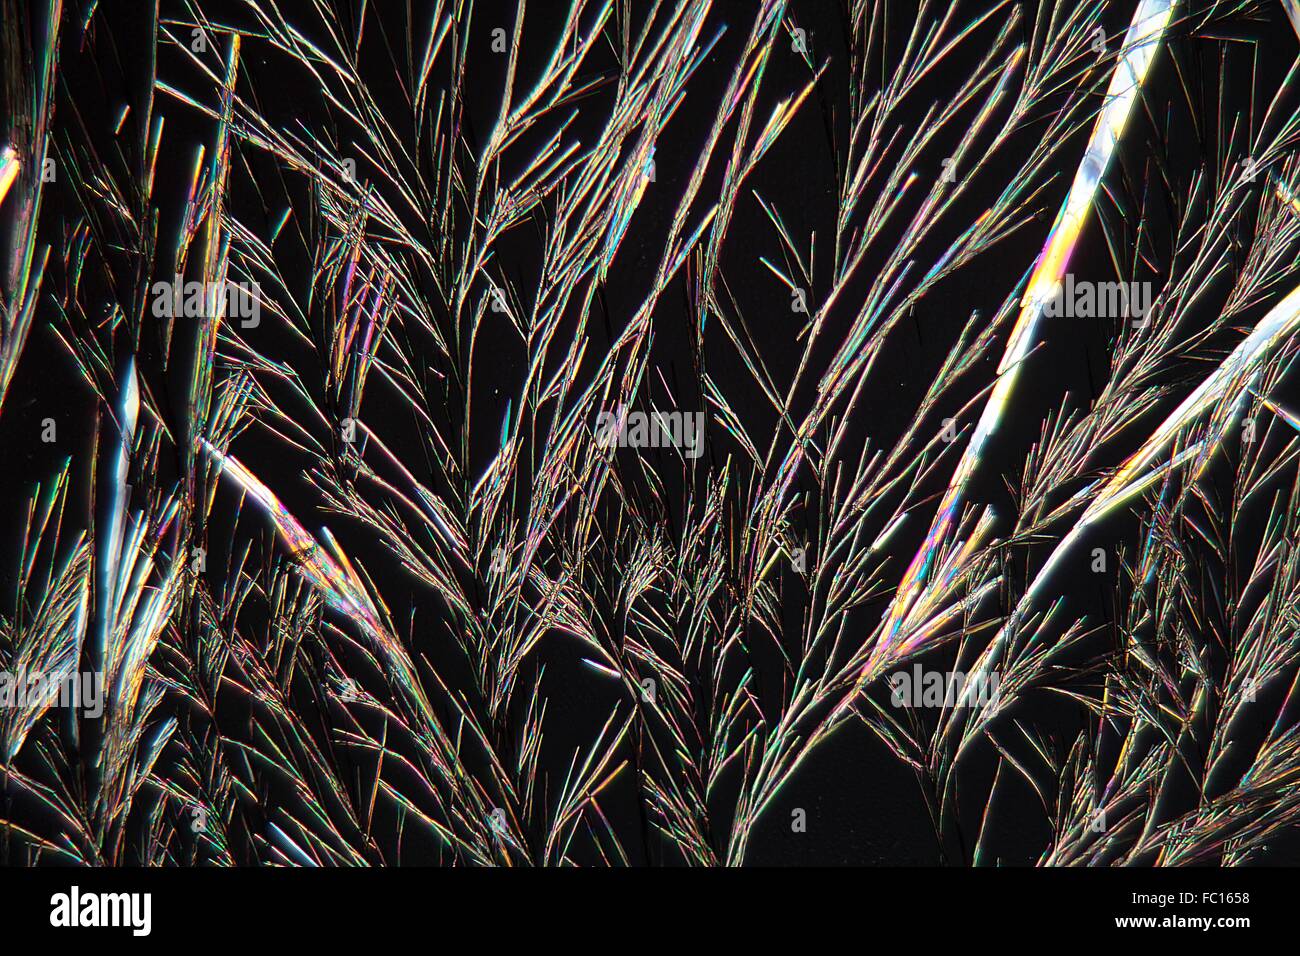 Coumarin crystals under the Microscope Stock Photo